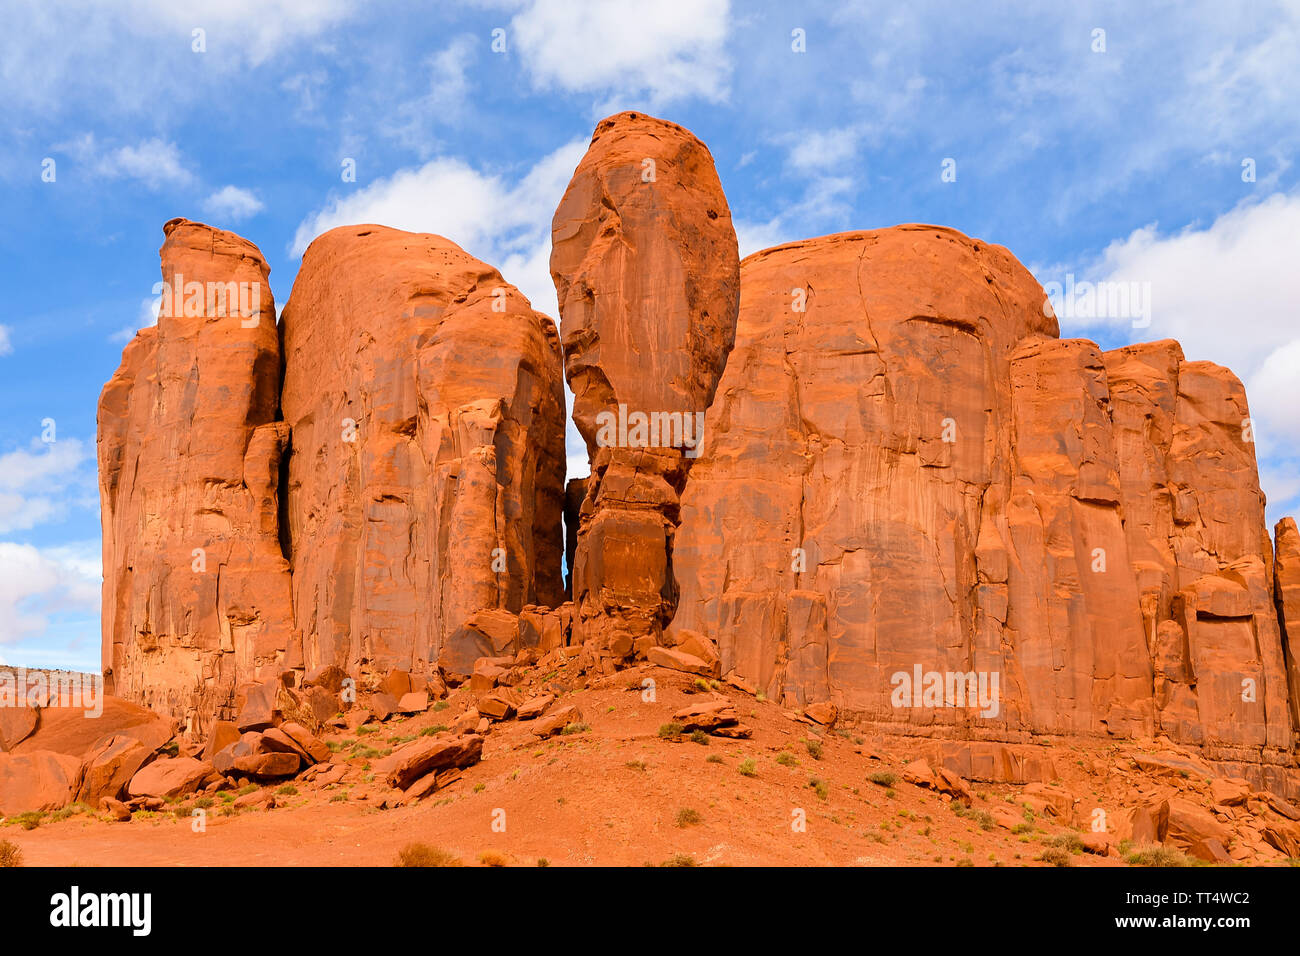 Cly Butte, Monument Valley, Navajo Tribal Park - Arizona Stock Photo